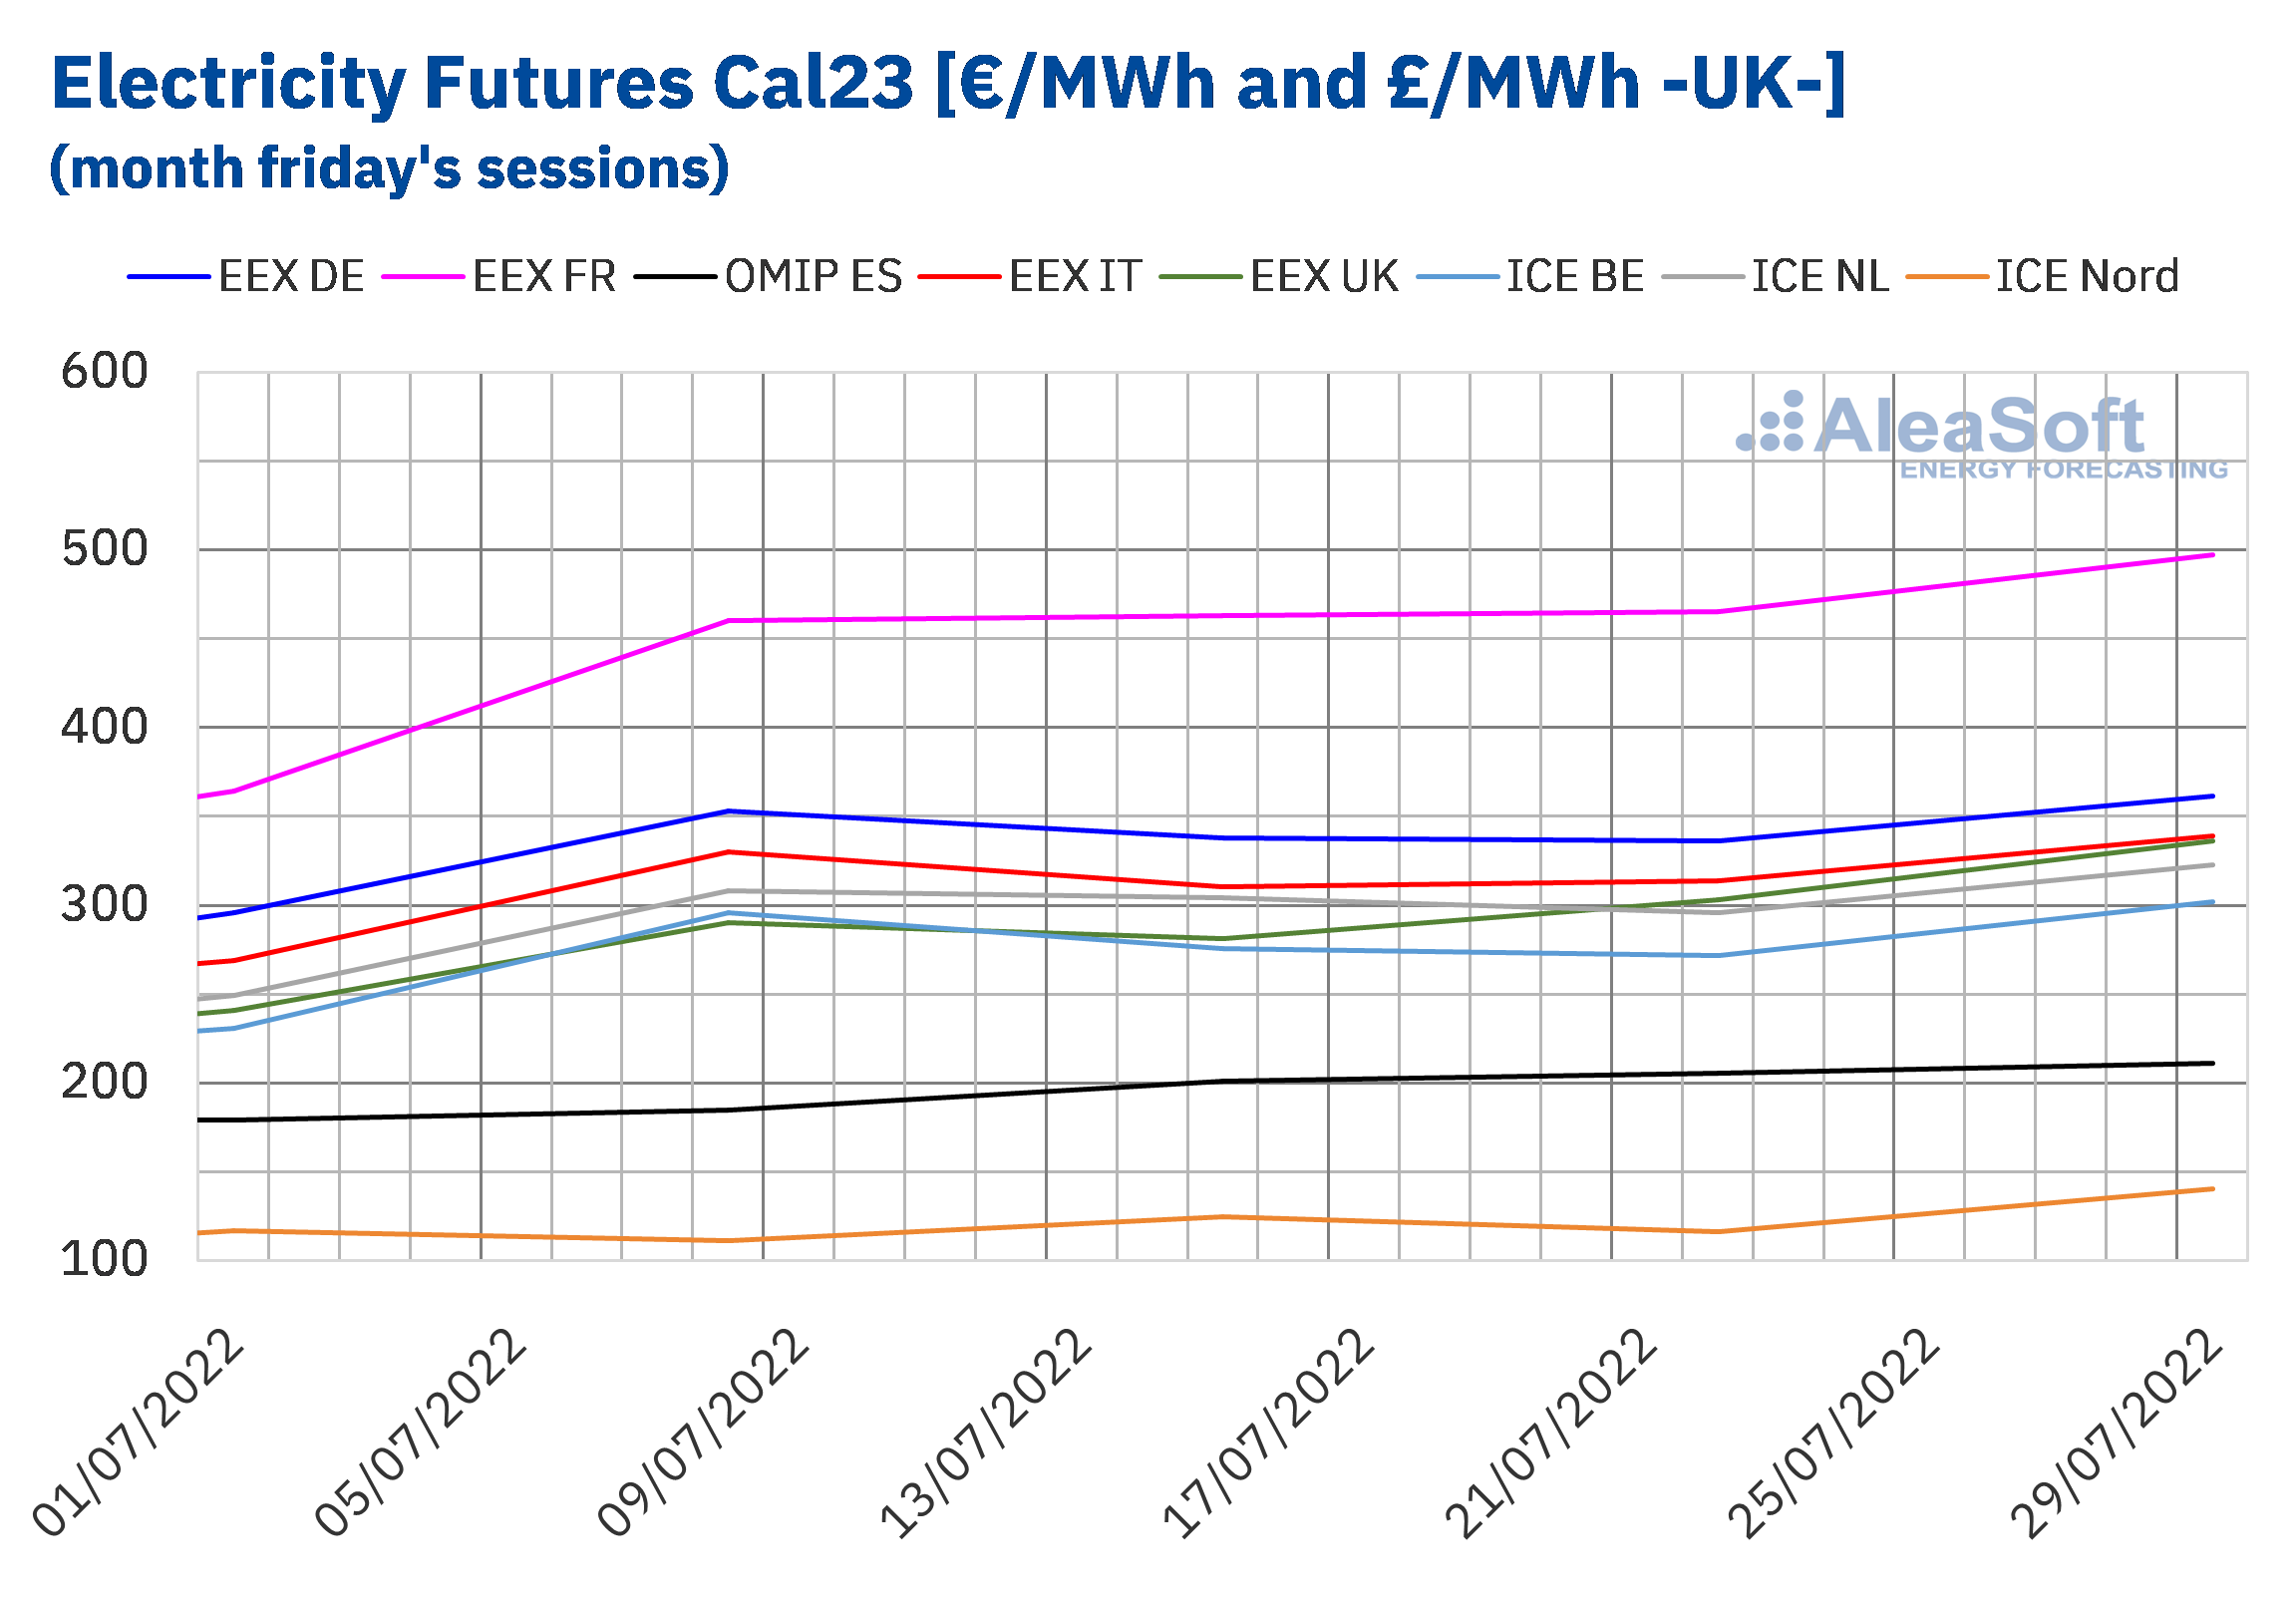 AleaSoft - Electricity futures Cal23 July 2022